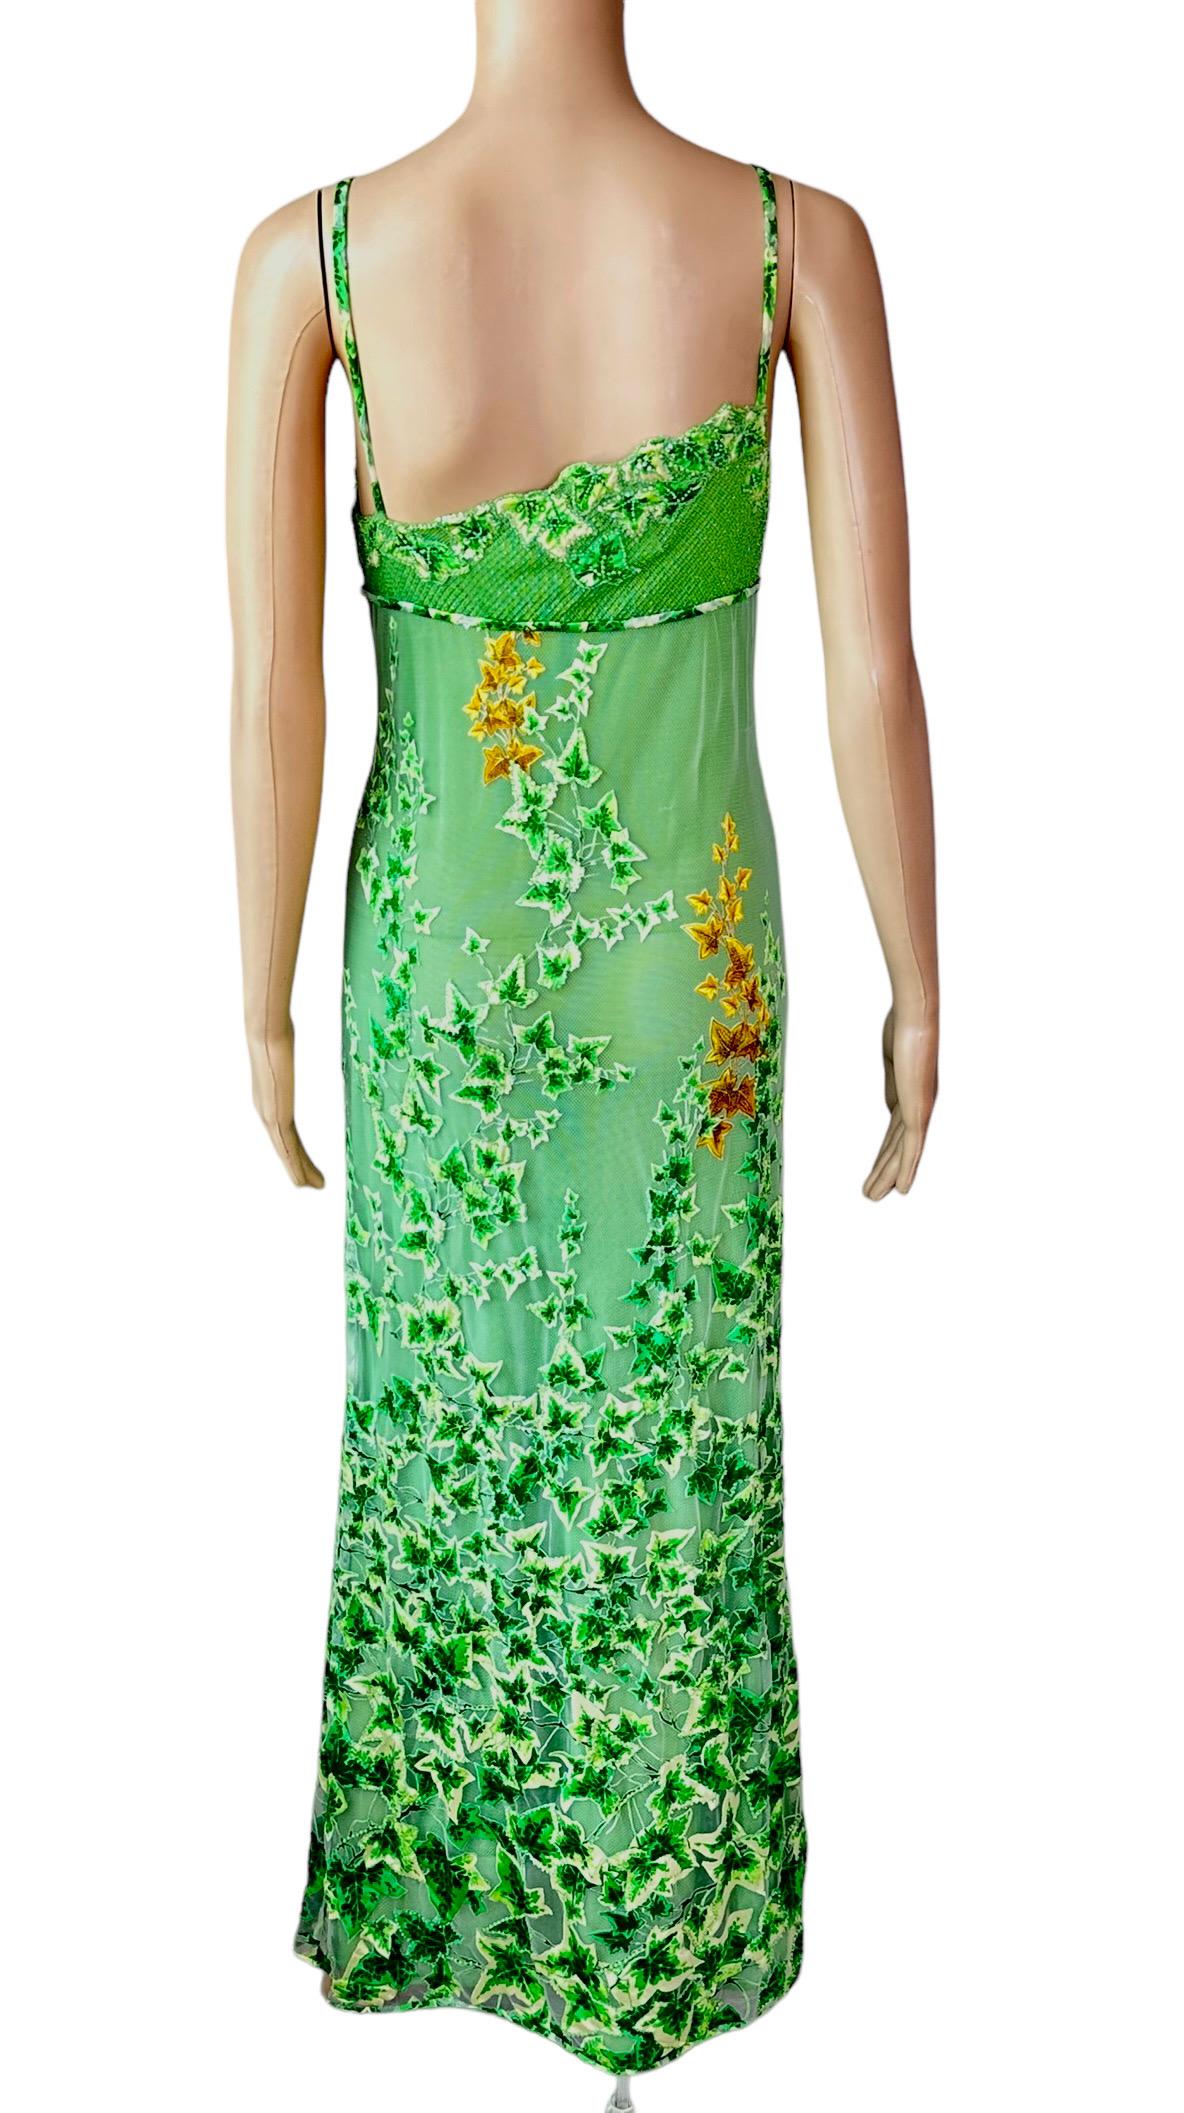 Green Gianni Versace S/S 1997 Runway Embellished Sheer Lace Shawl Evening Dress Gown  For Sale